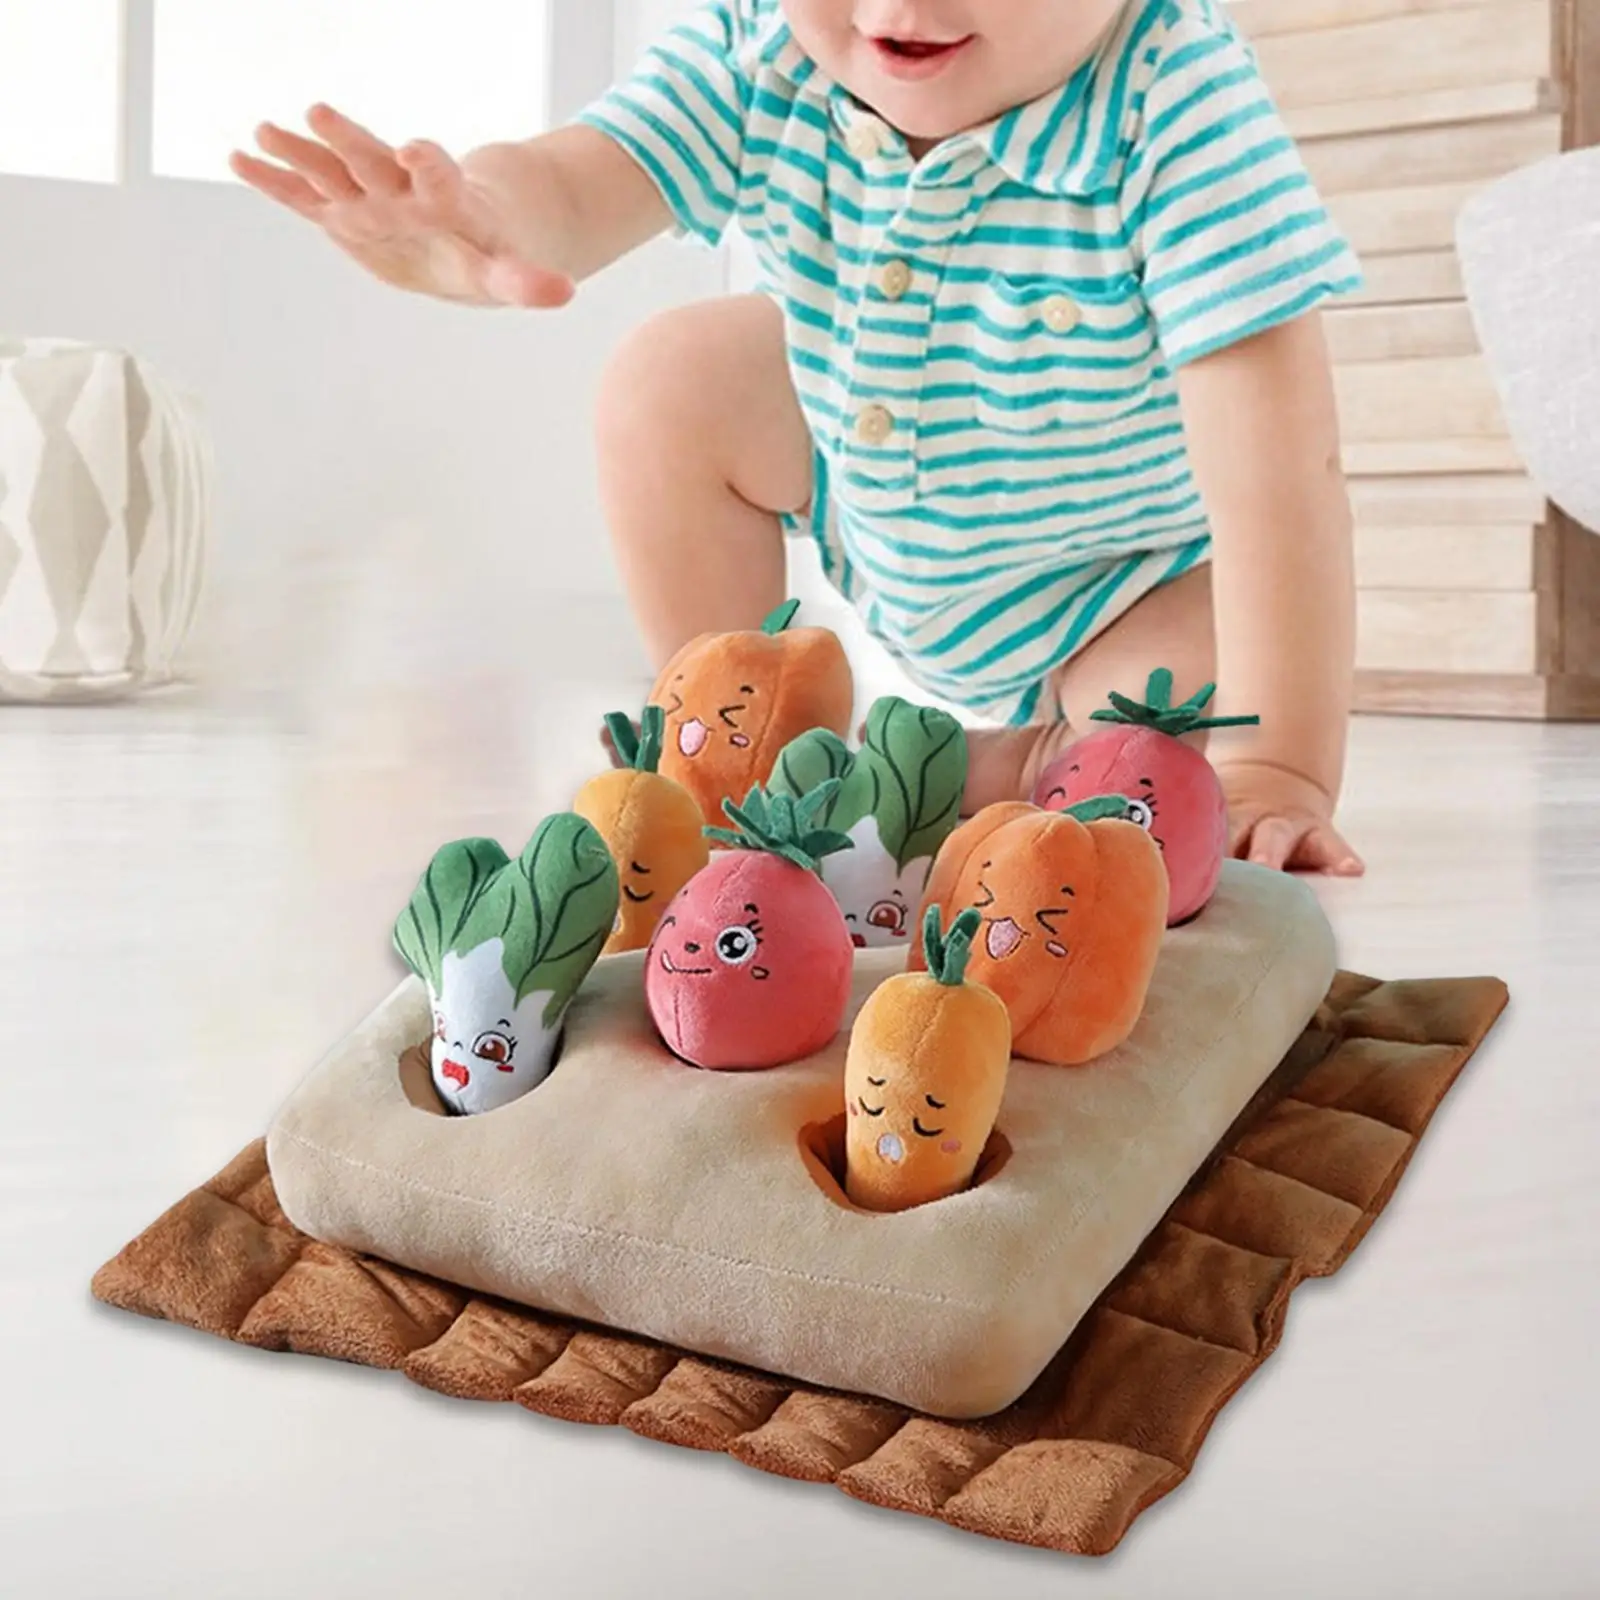 Toddlers Montessori Toys Vegetable Plush Toy for Matching Game Size 37x35cm